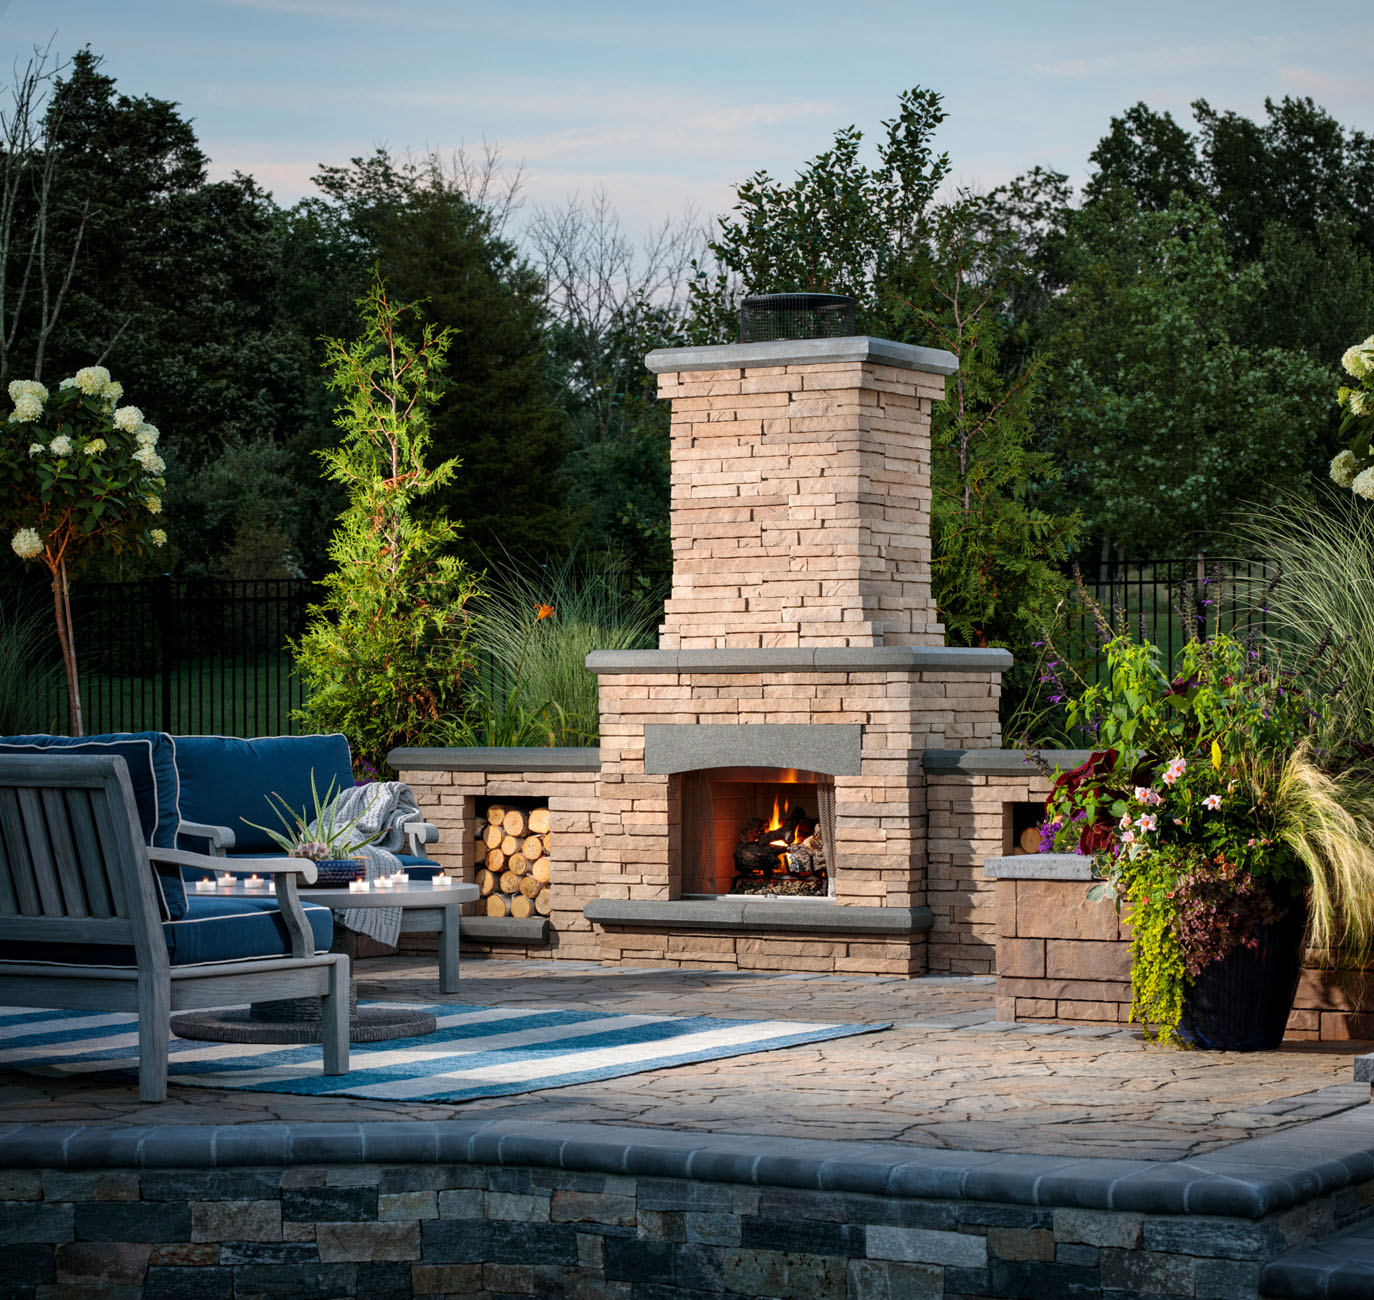 Bordeaux Series Outdoor Fireplaces & Kitchens